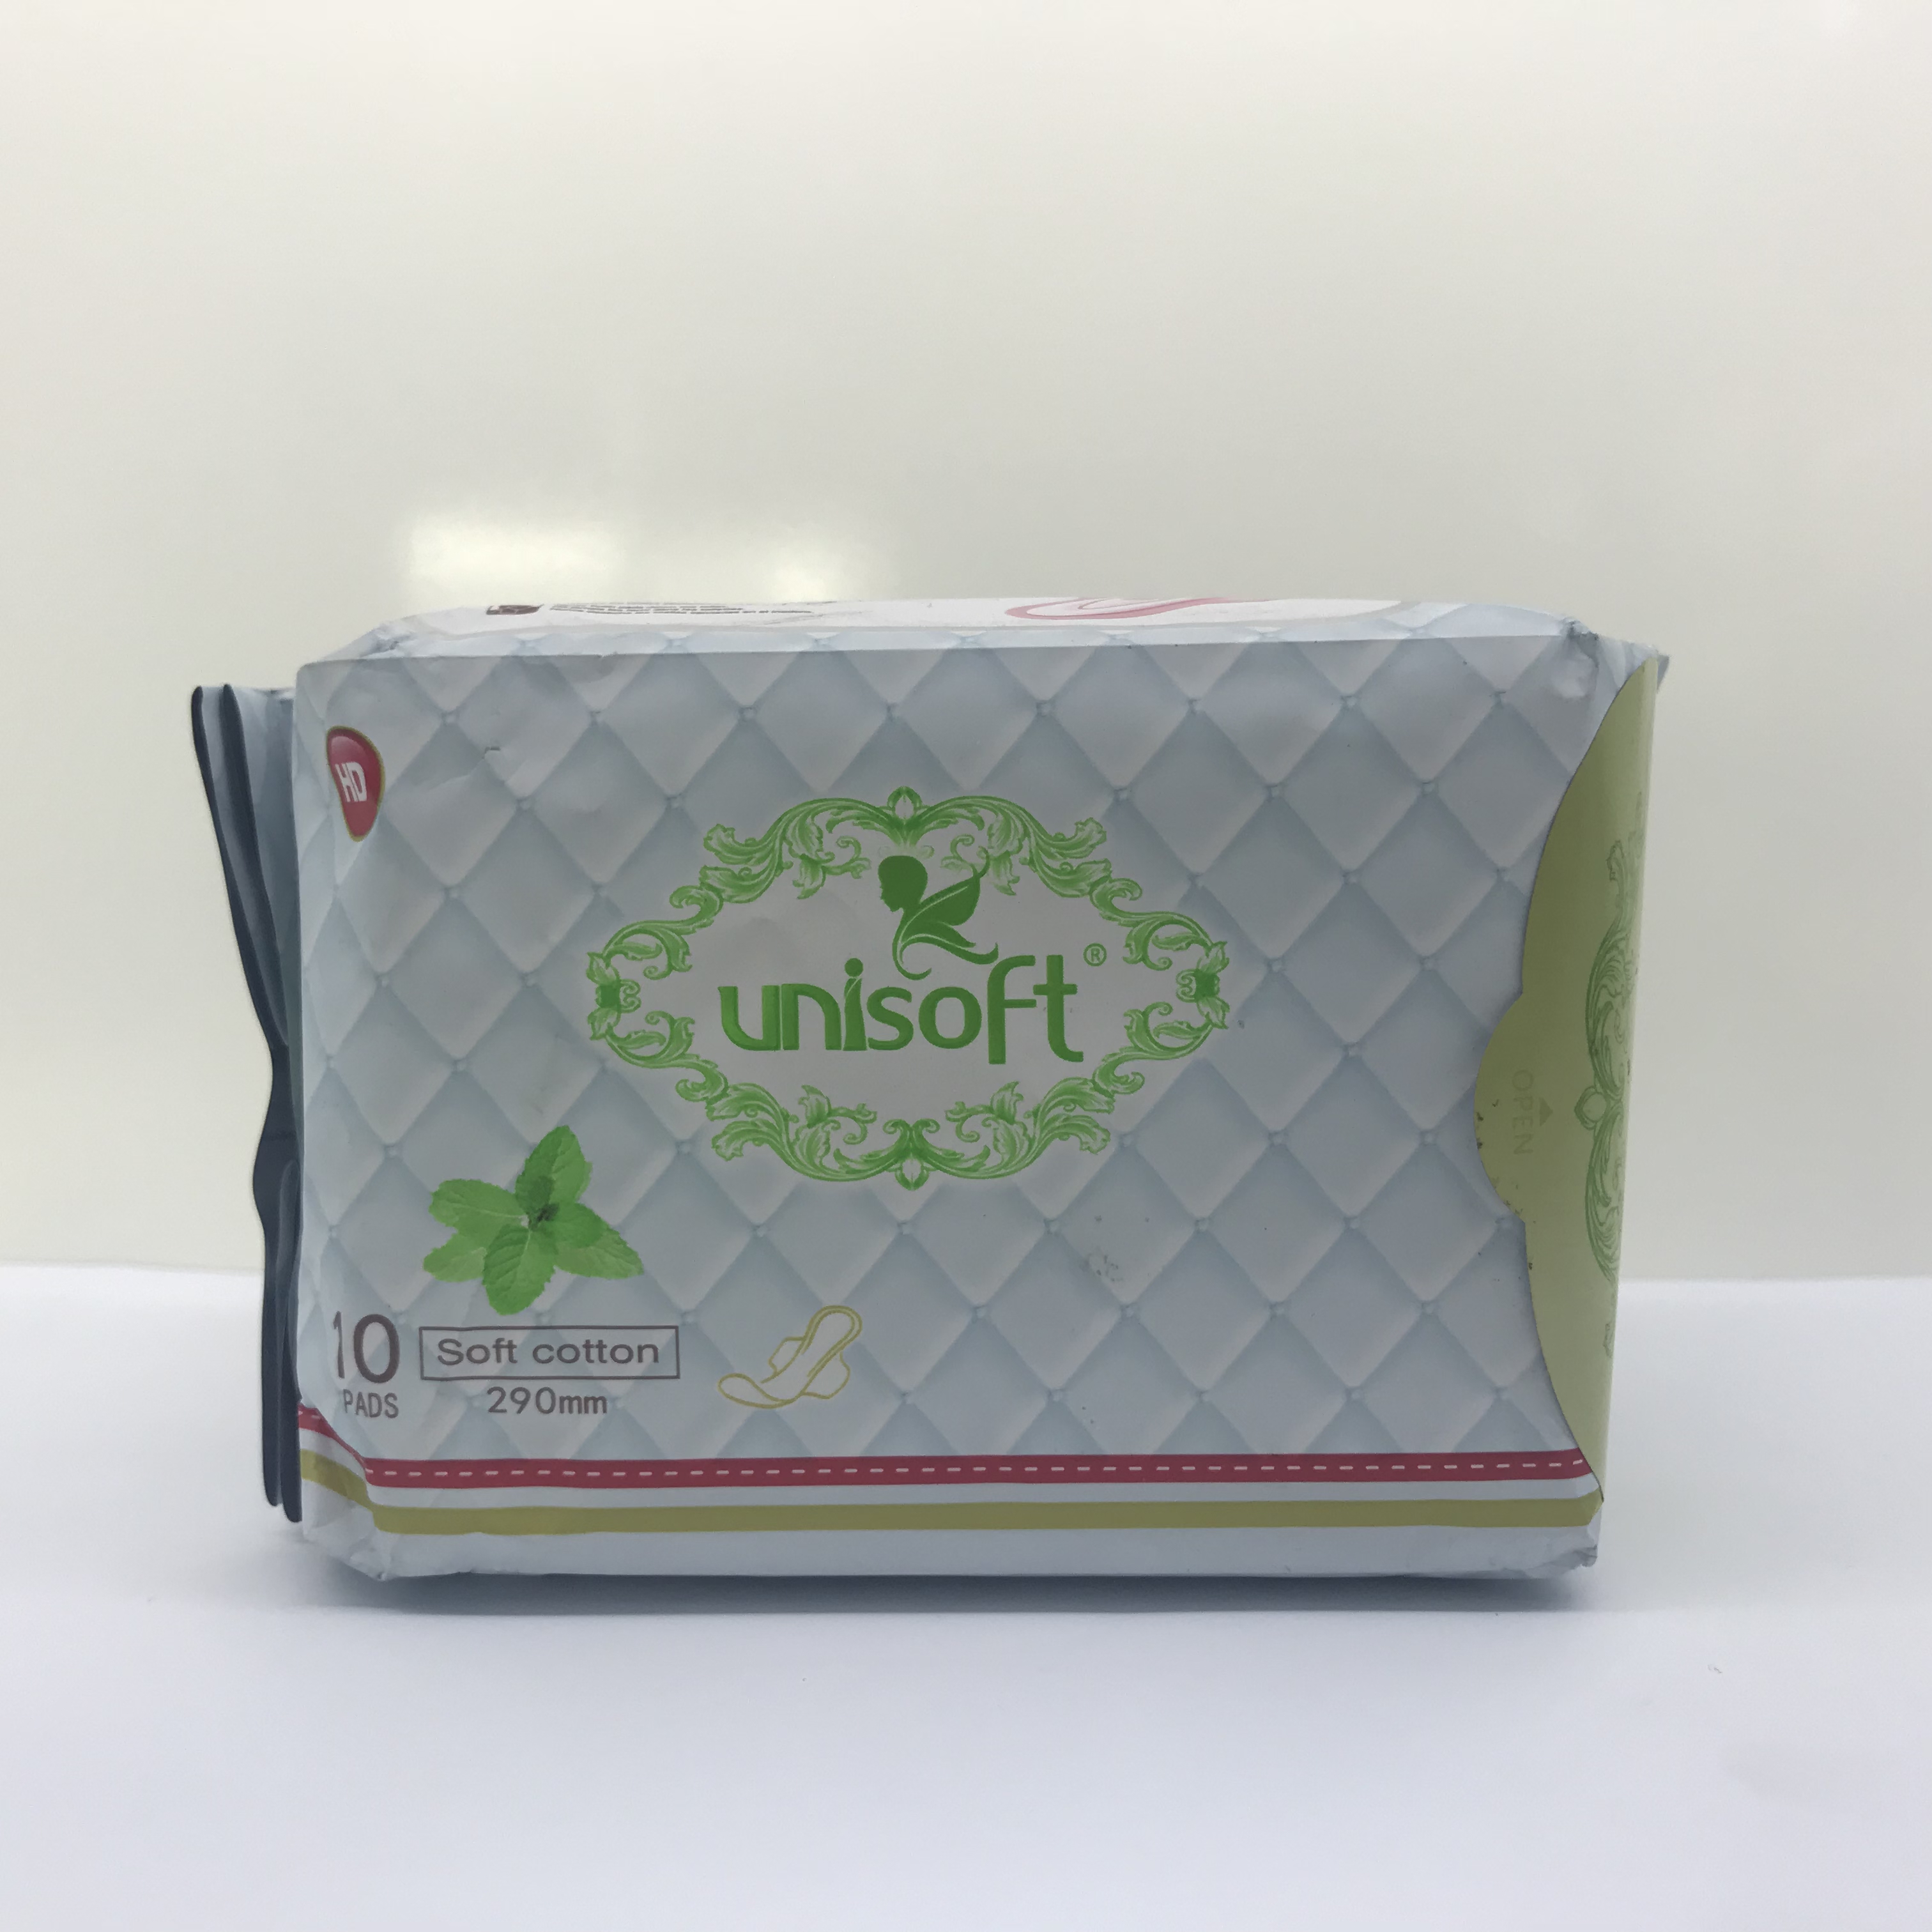 2021 China New Design Longrich Pad Sanitary Napkins -
 Organic waterproof high Absorbent pure Cotton soft ladies sanitary pads size – Union Paper